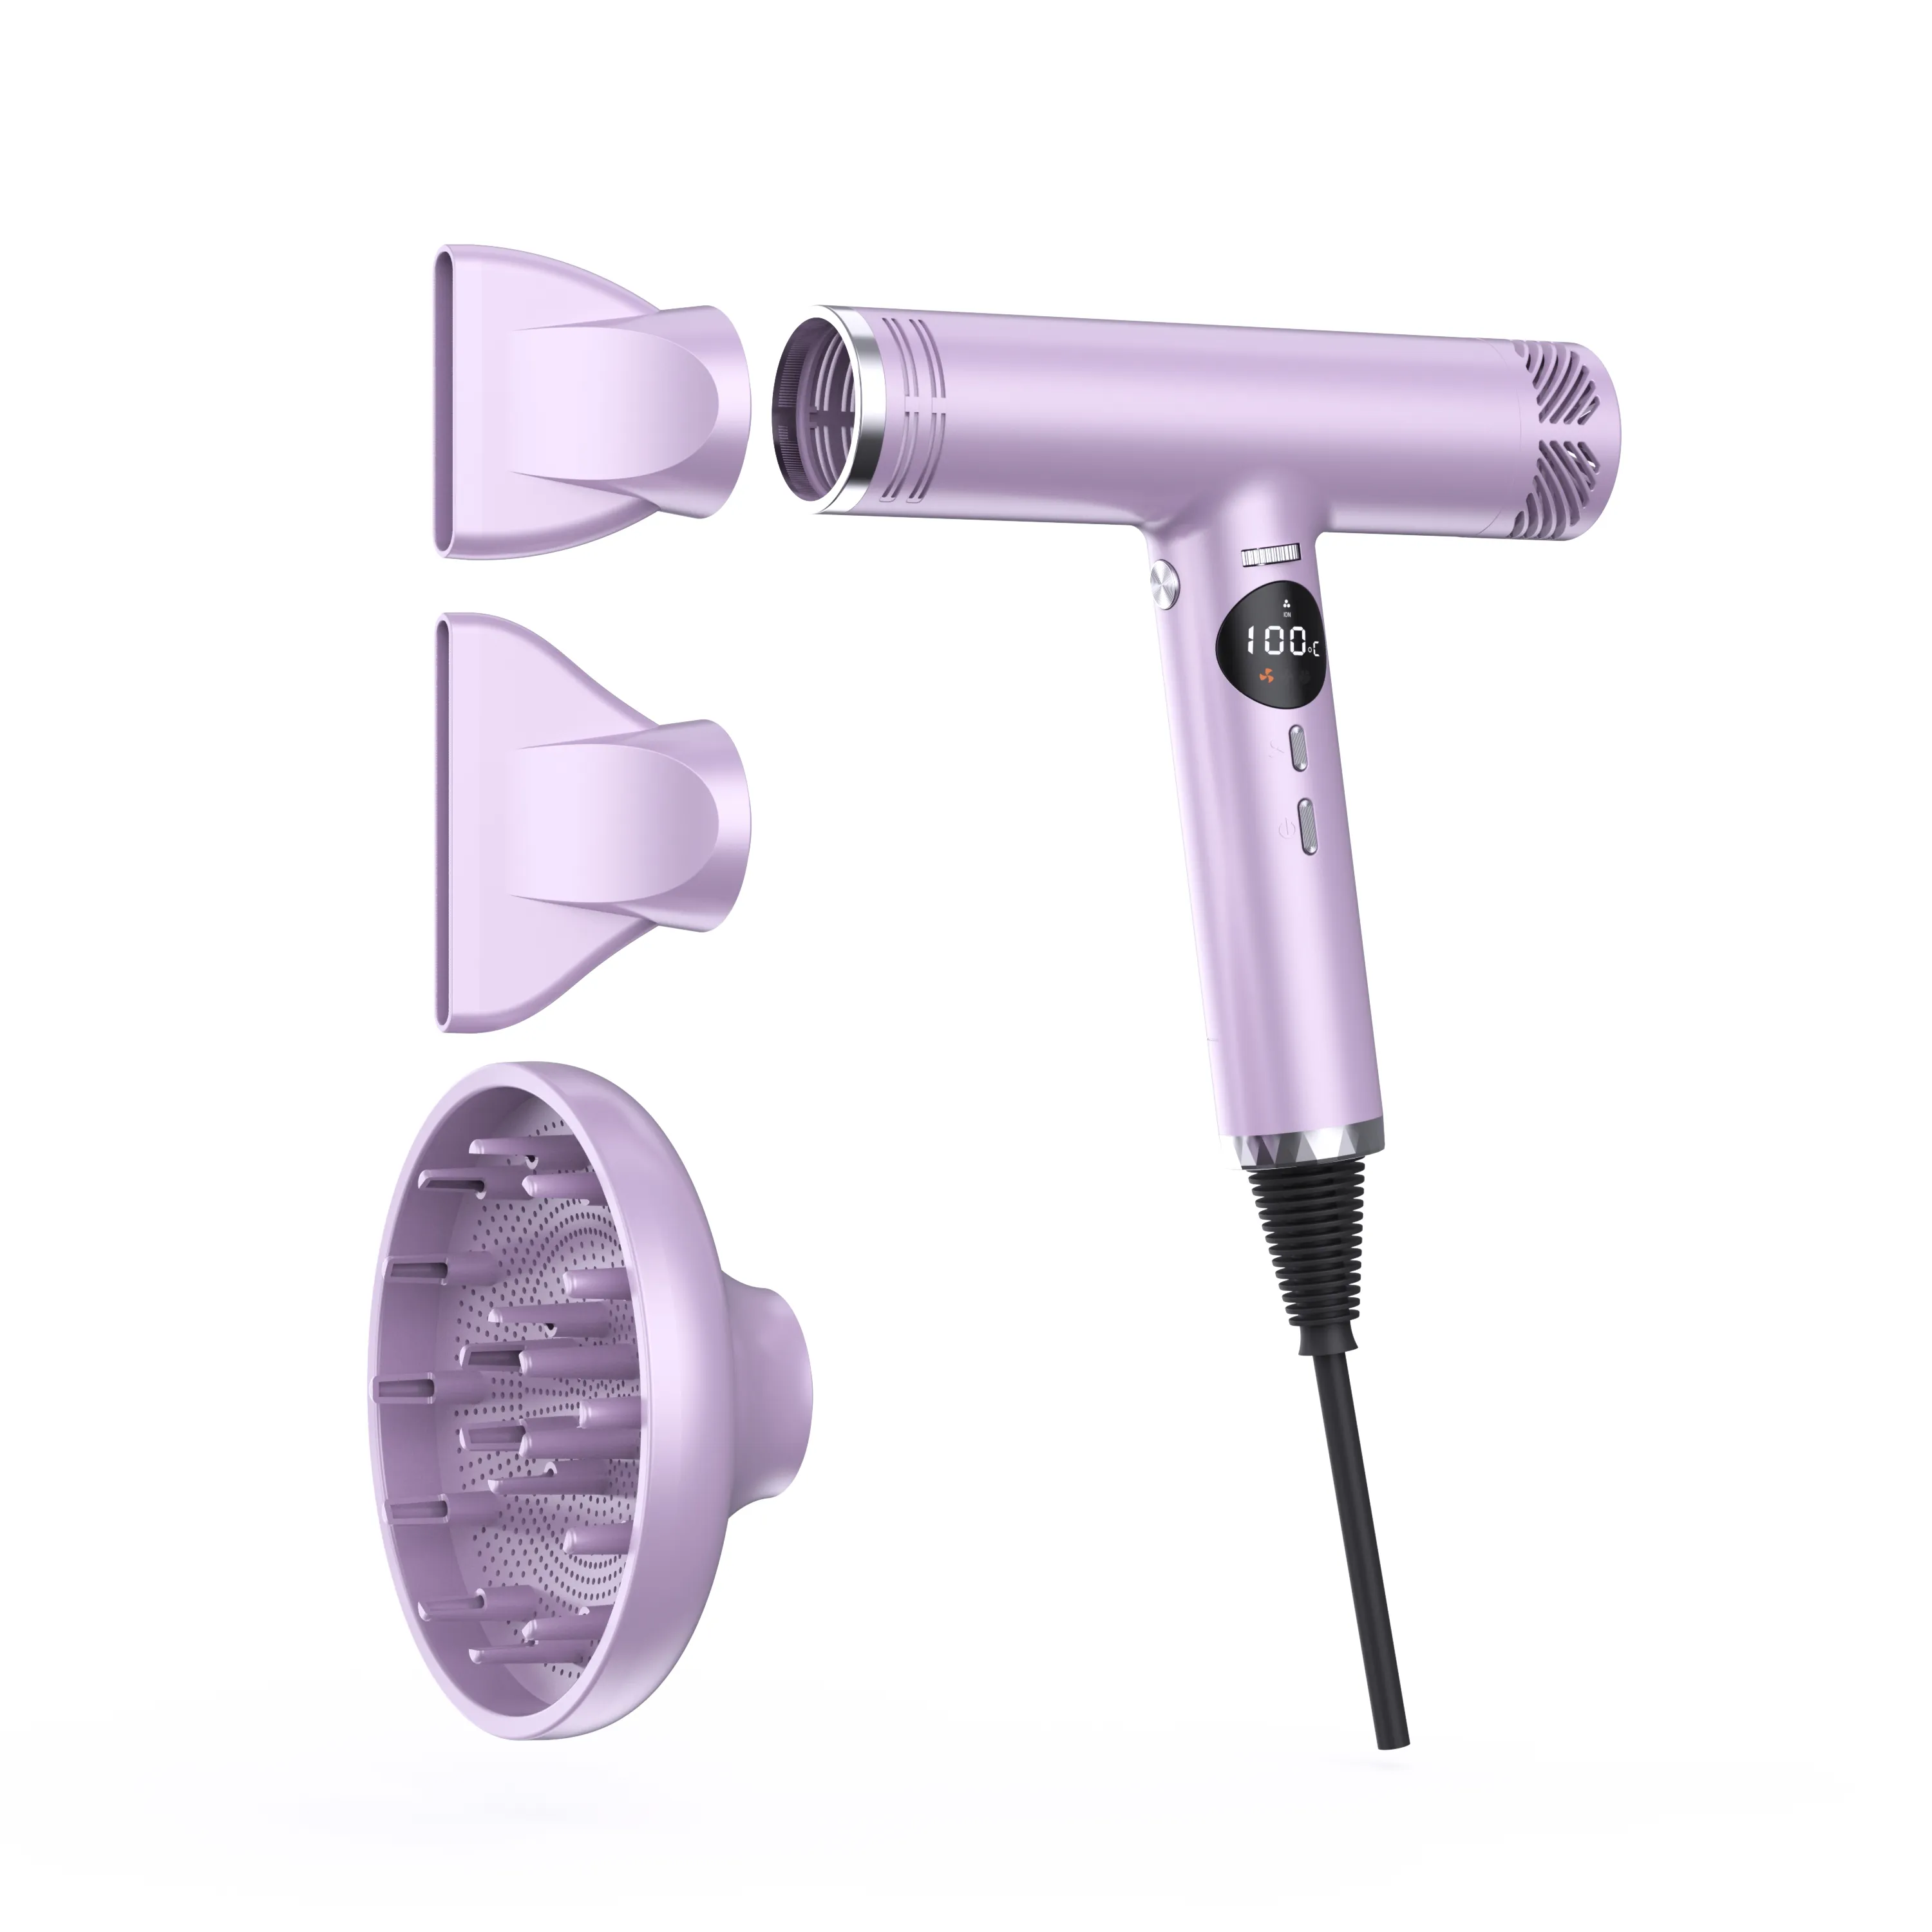 2 Billion Negative Ion Hair Make Hair Smoothy and Shiny Light Weight Blow Dryer Brushless Motor Dryers Hair Care Blowing Dryer